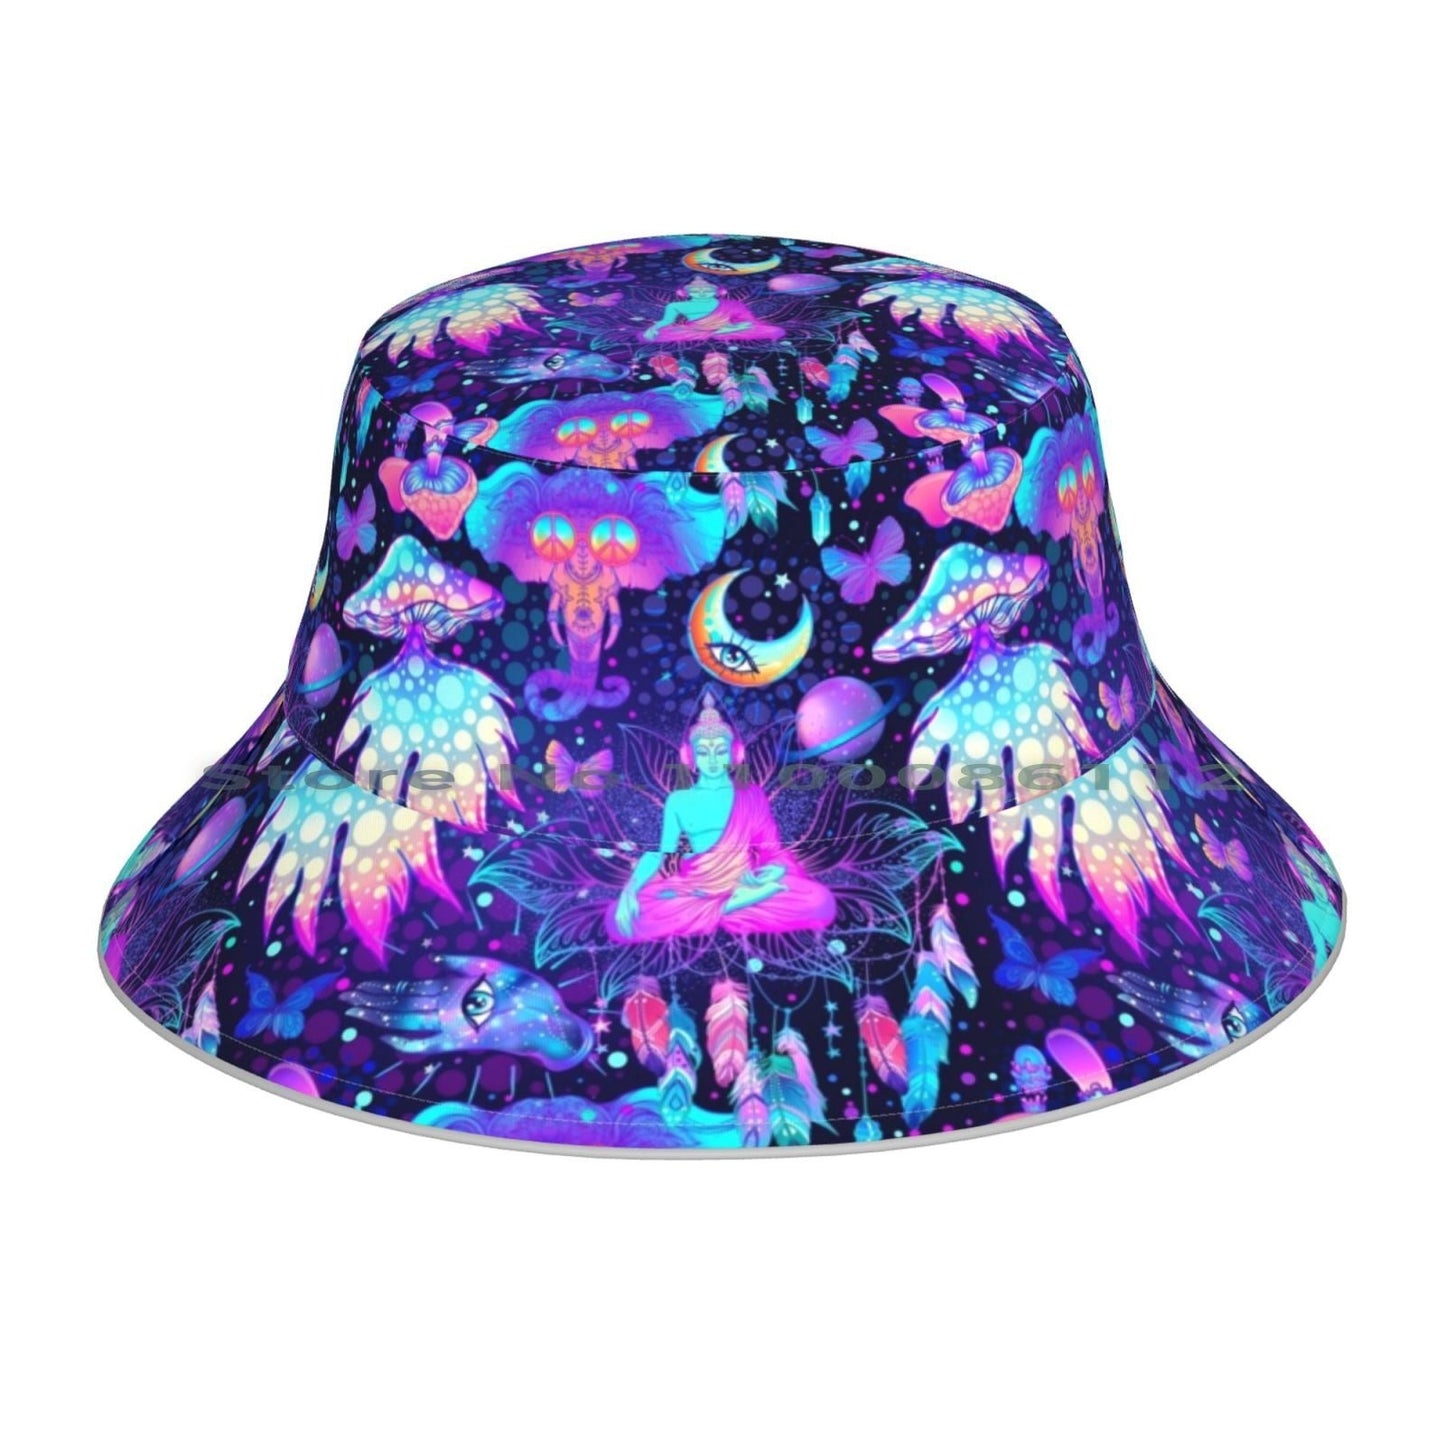 Trippy Hippie Bucket Hat Sun Cap Trippy Hippie Boho New Age Patterns Psychedelic Buddha Mushrooms Peace Sign Contemporary